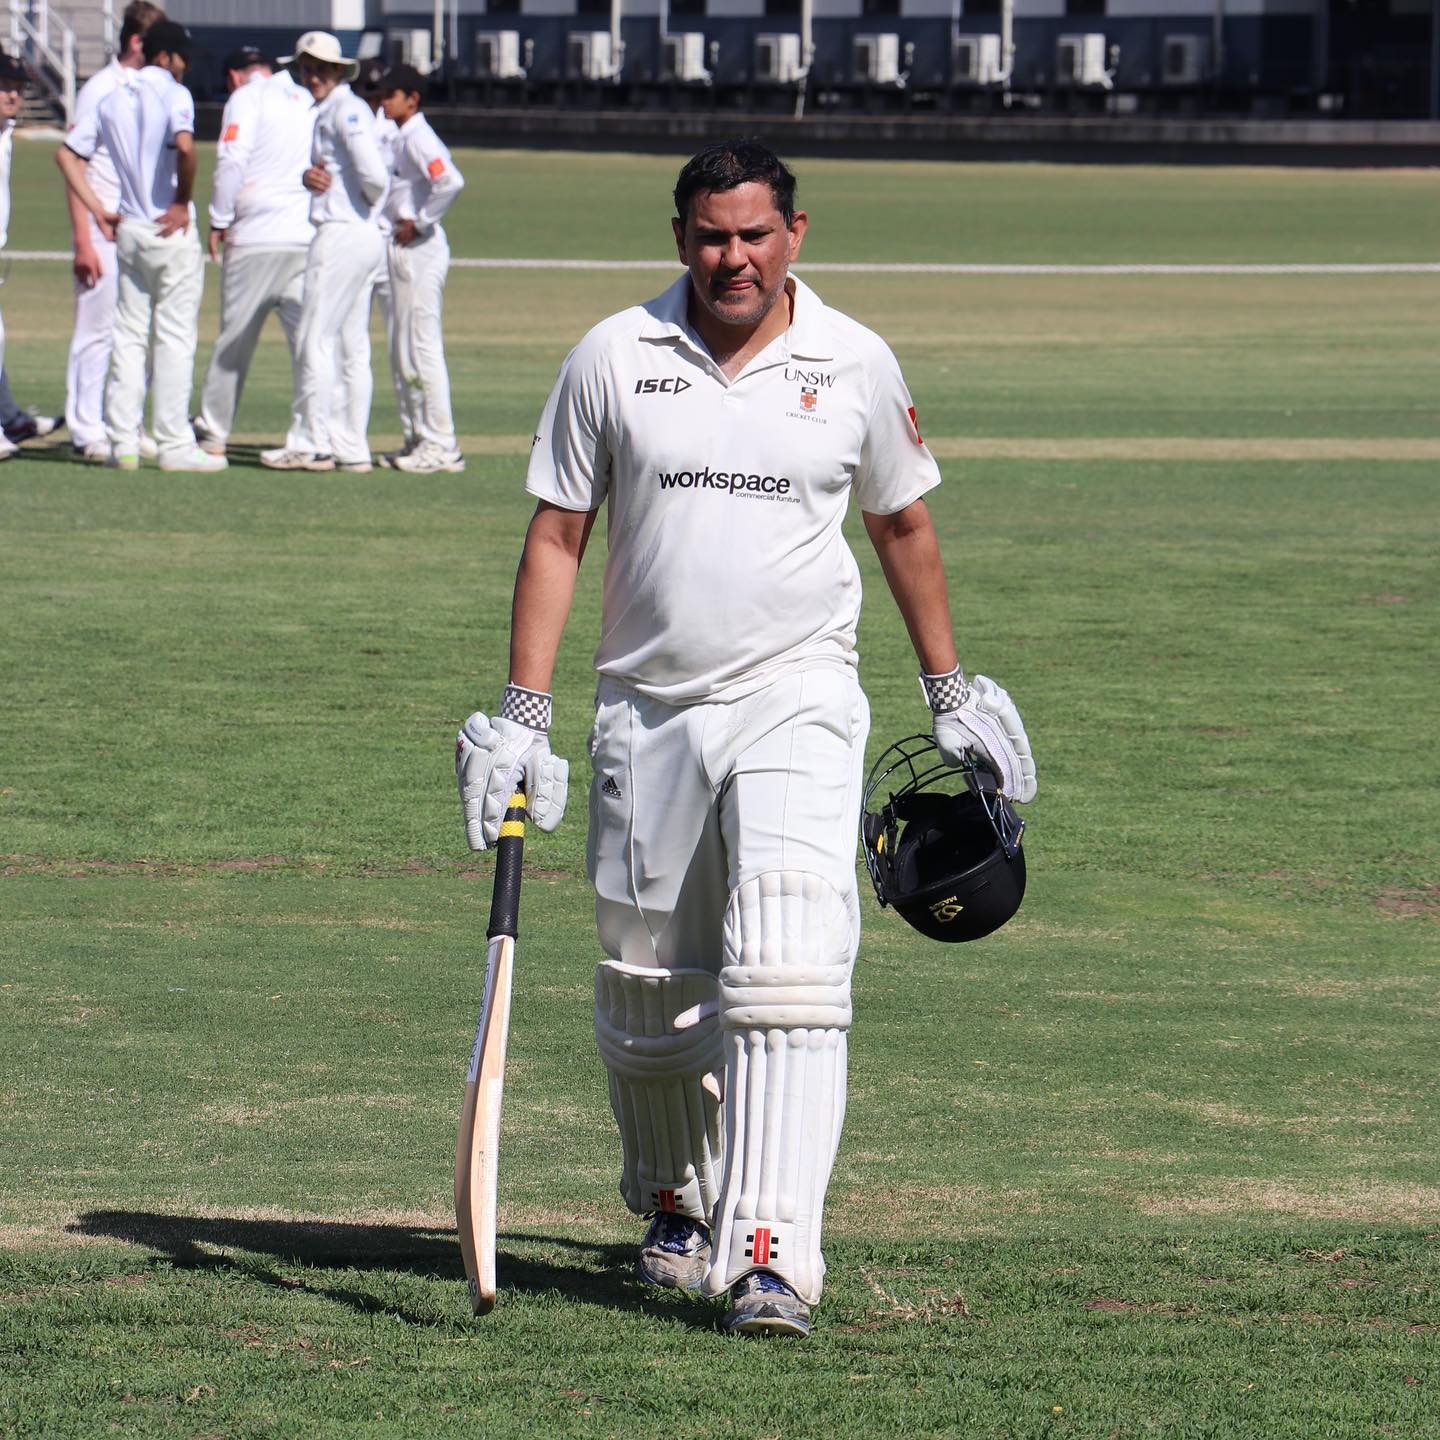 Danny Bhandari scored 140 in Fourth Grade to chase down Wests' total at David Philips North